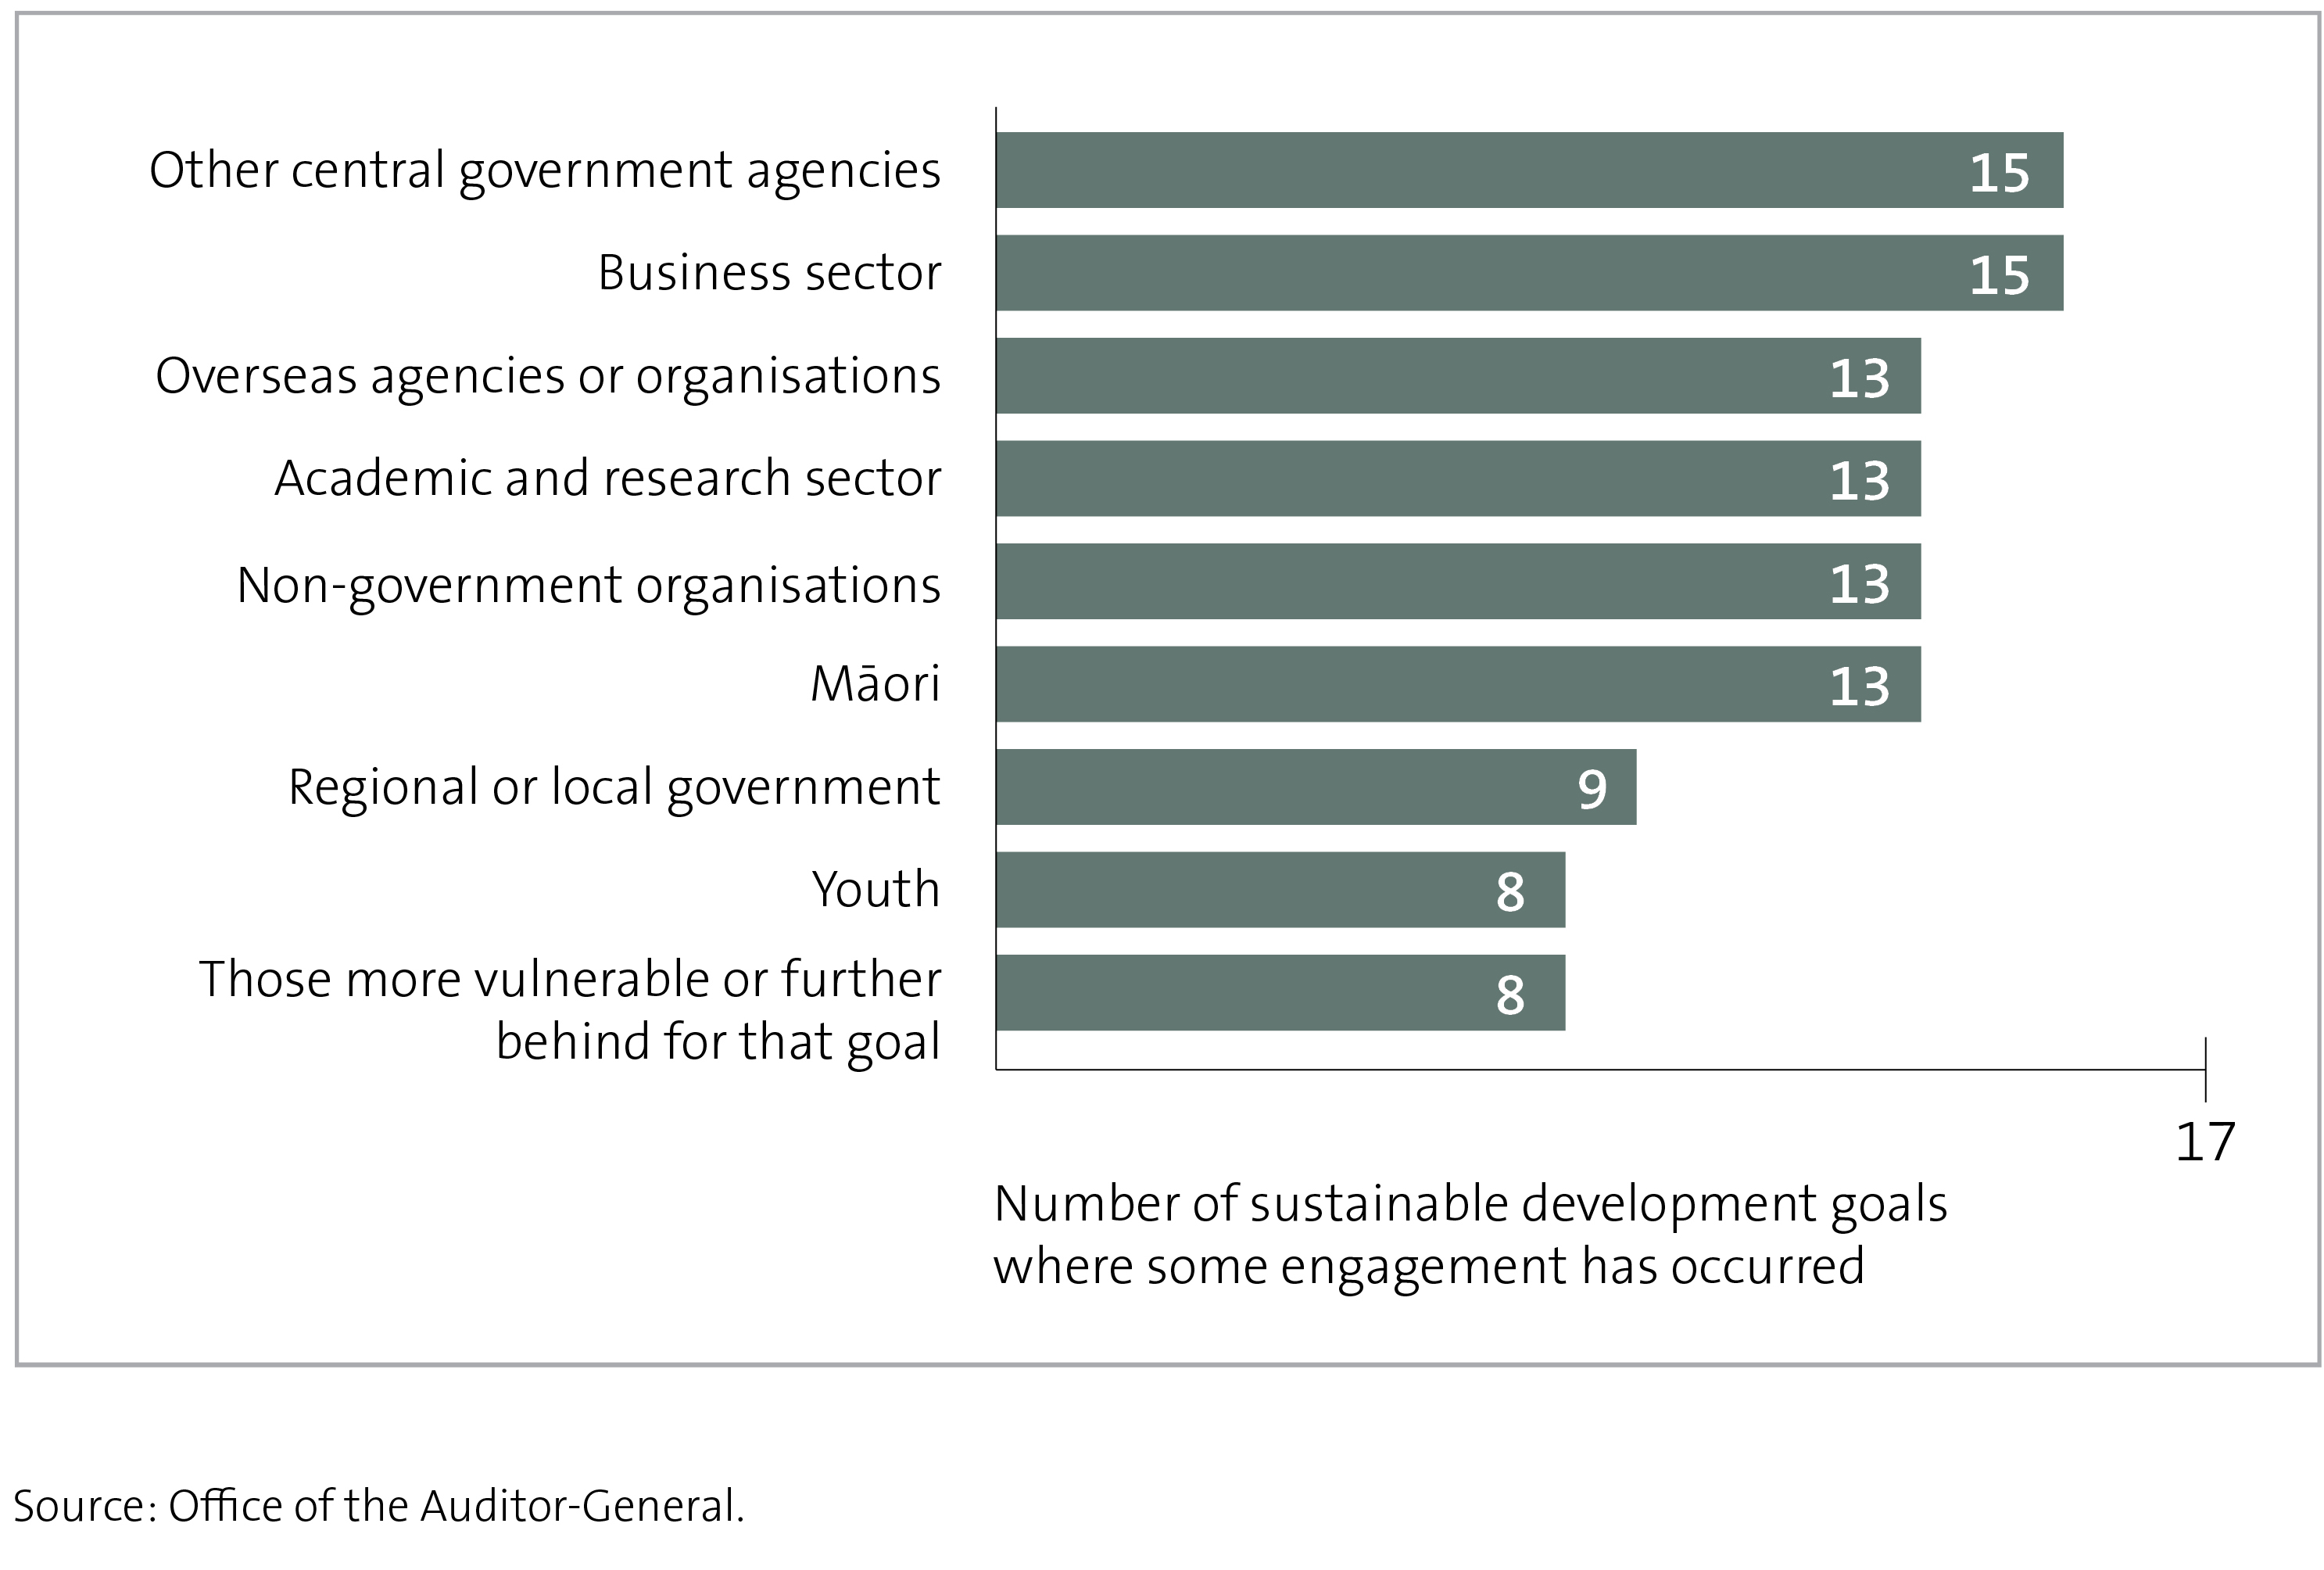 Figure 9 - Number of sustainable development goals where surveyed agencies have engaged with different stakeholder groups on work relevant to that goal